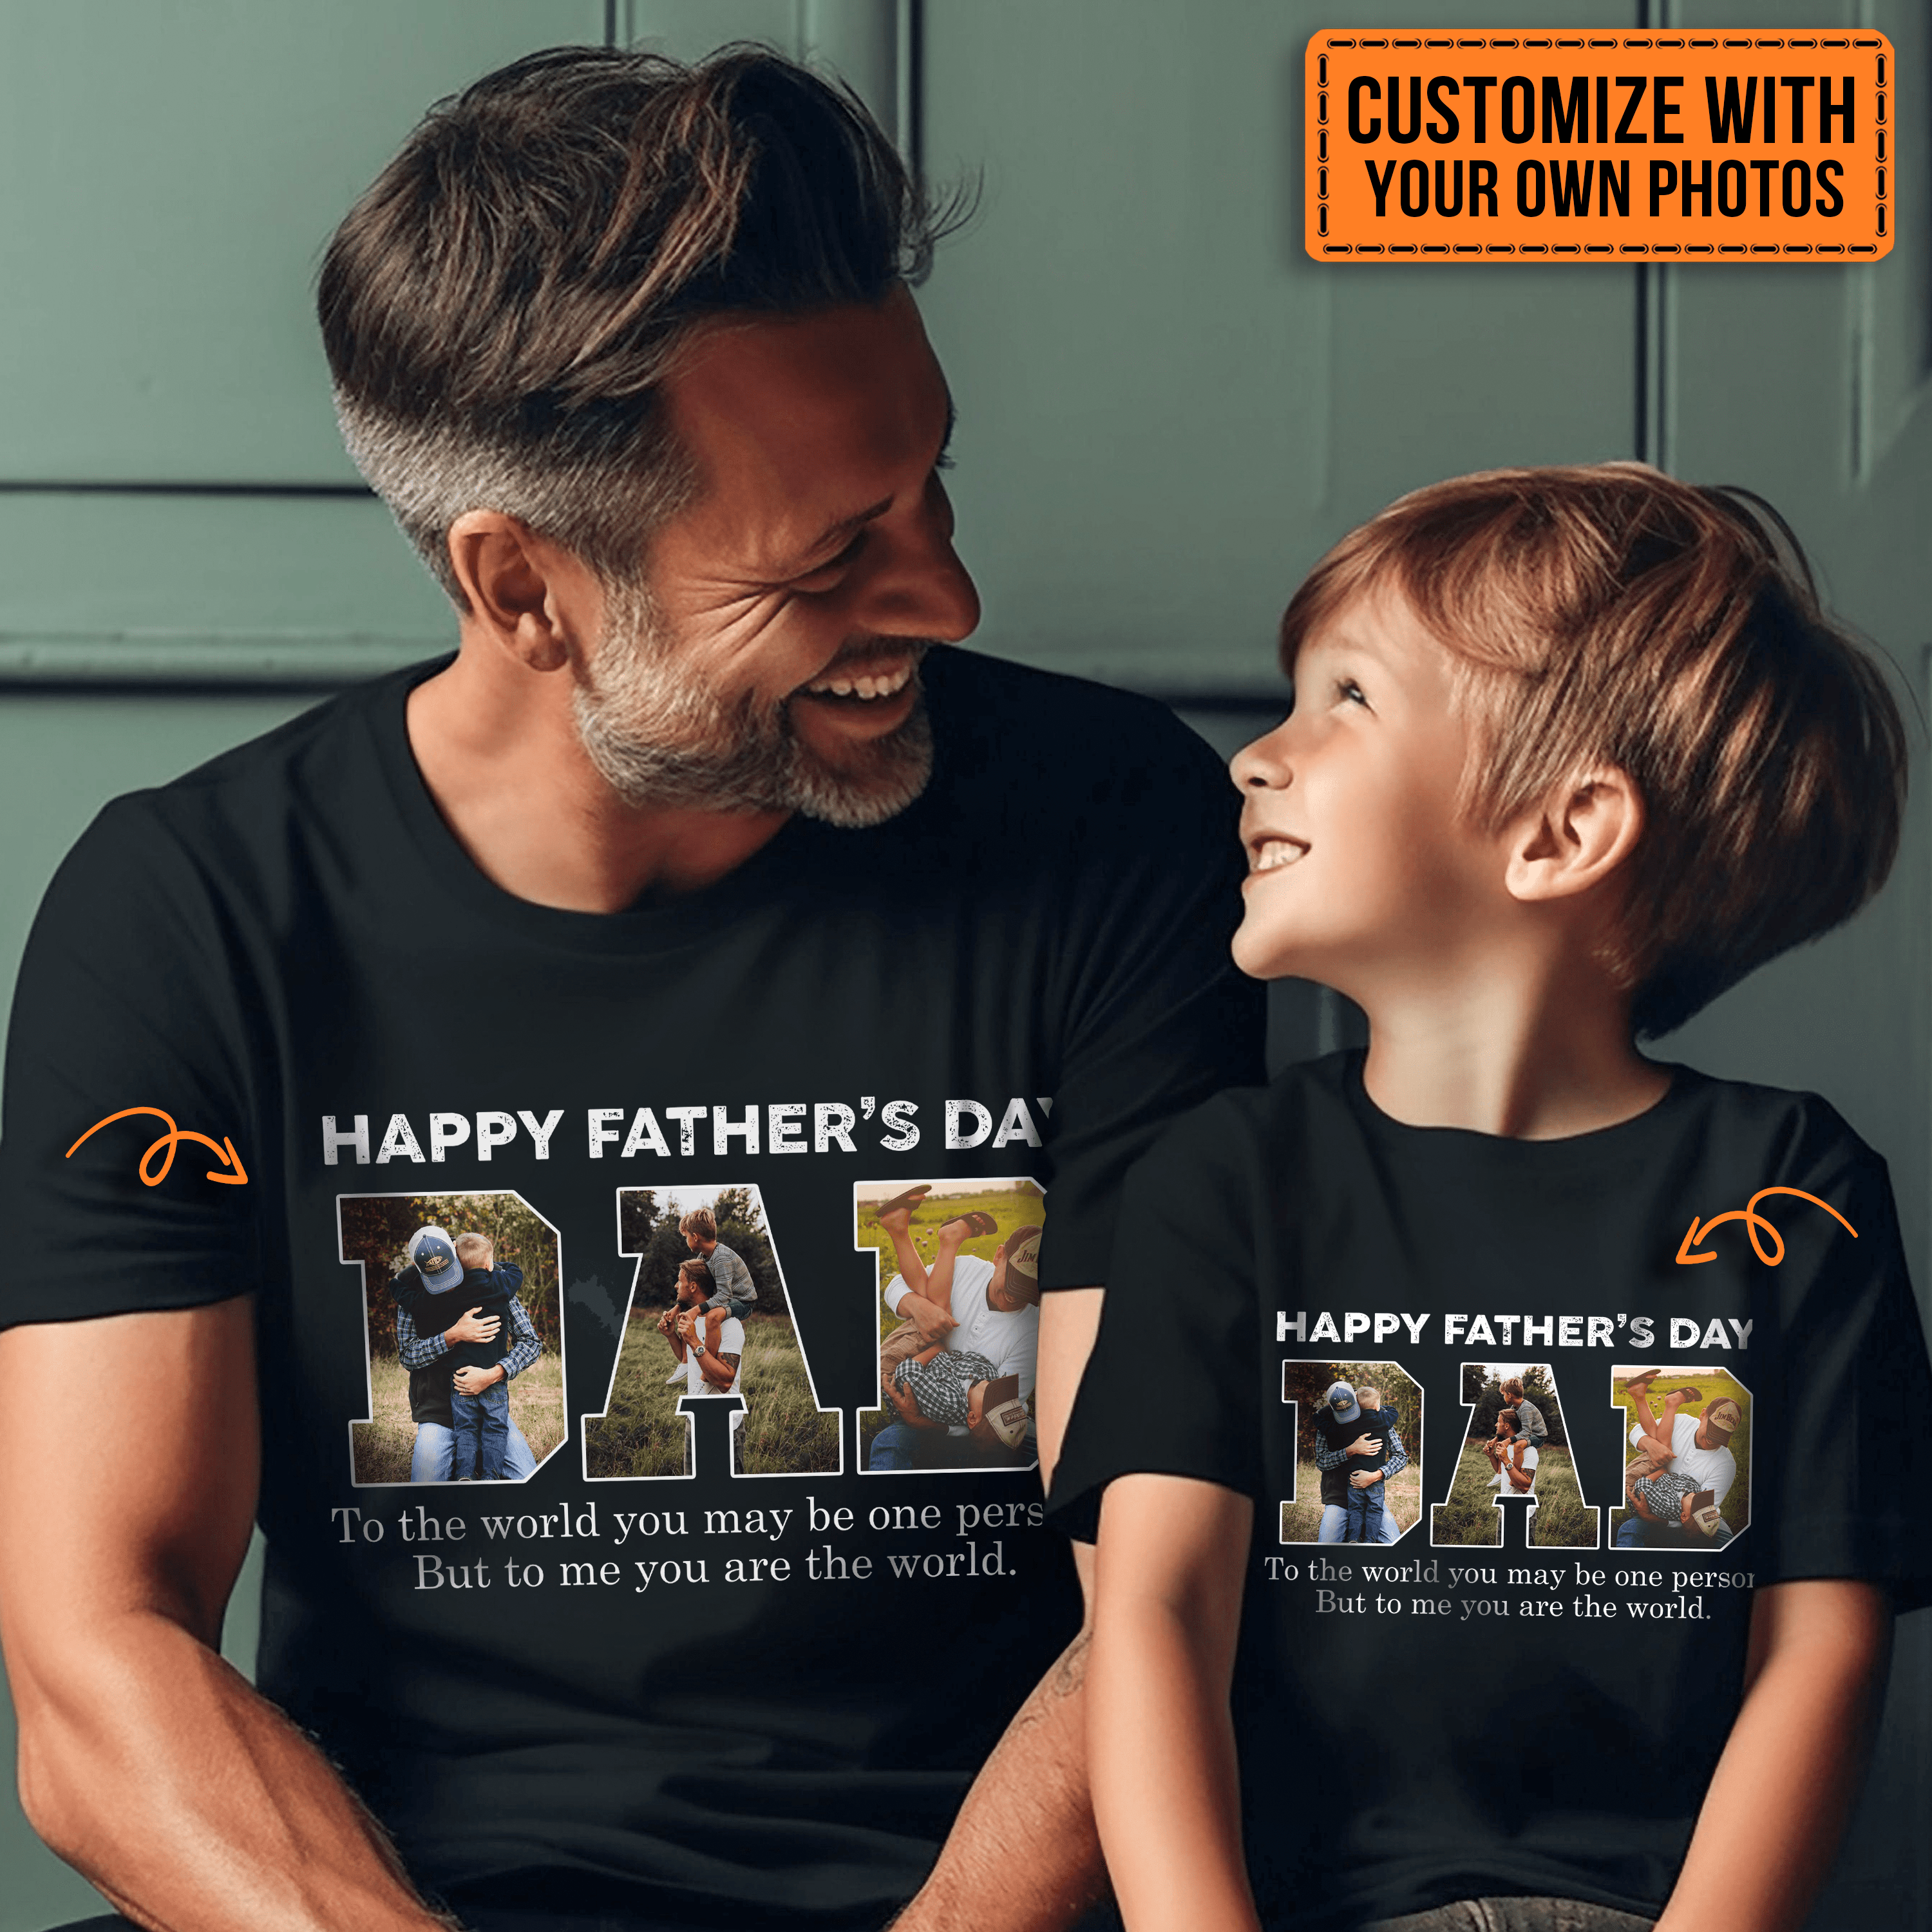 Custom Photo - Happy Fathers' Day. To Me You Are The World - Funny Fathers Day Personalized Custom T Shirt - Birthday, Loving, Funny Gift for Grandfather/Dad/Father, Husband, Grandparent